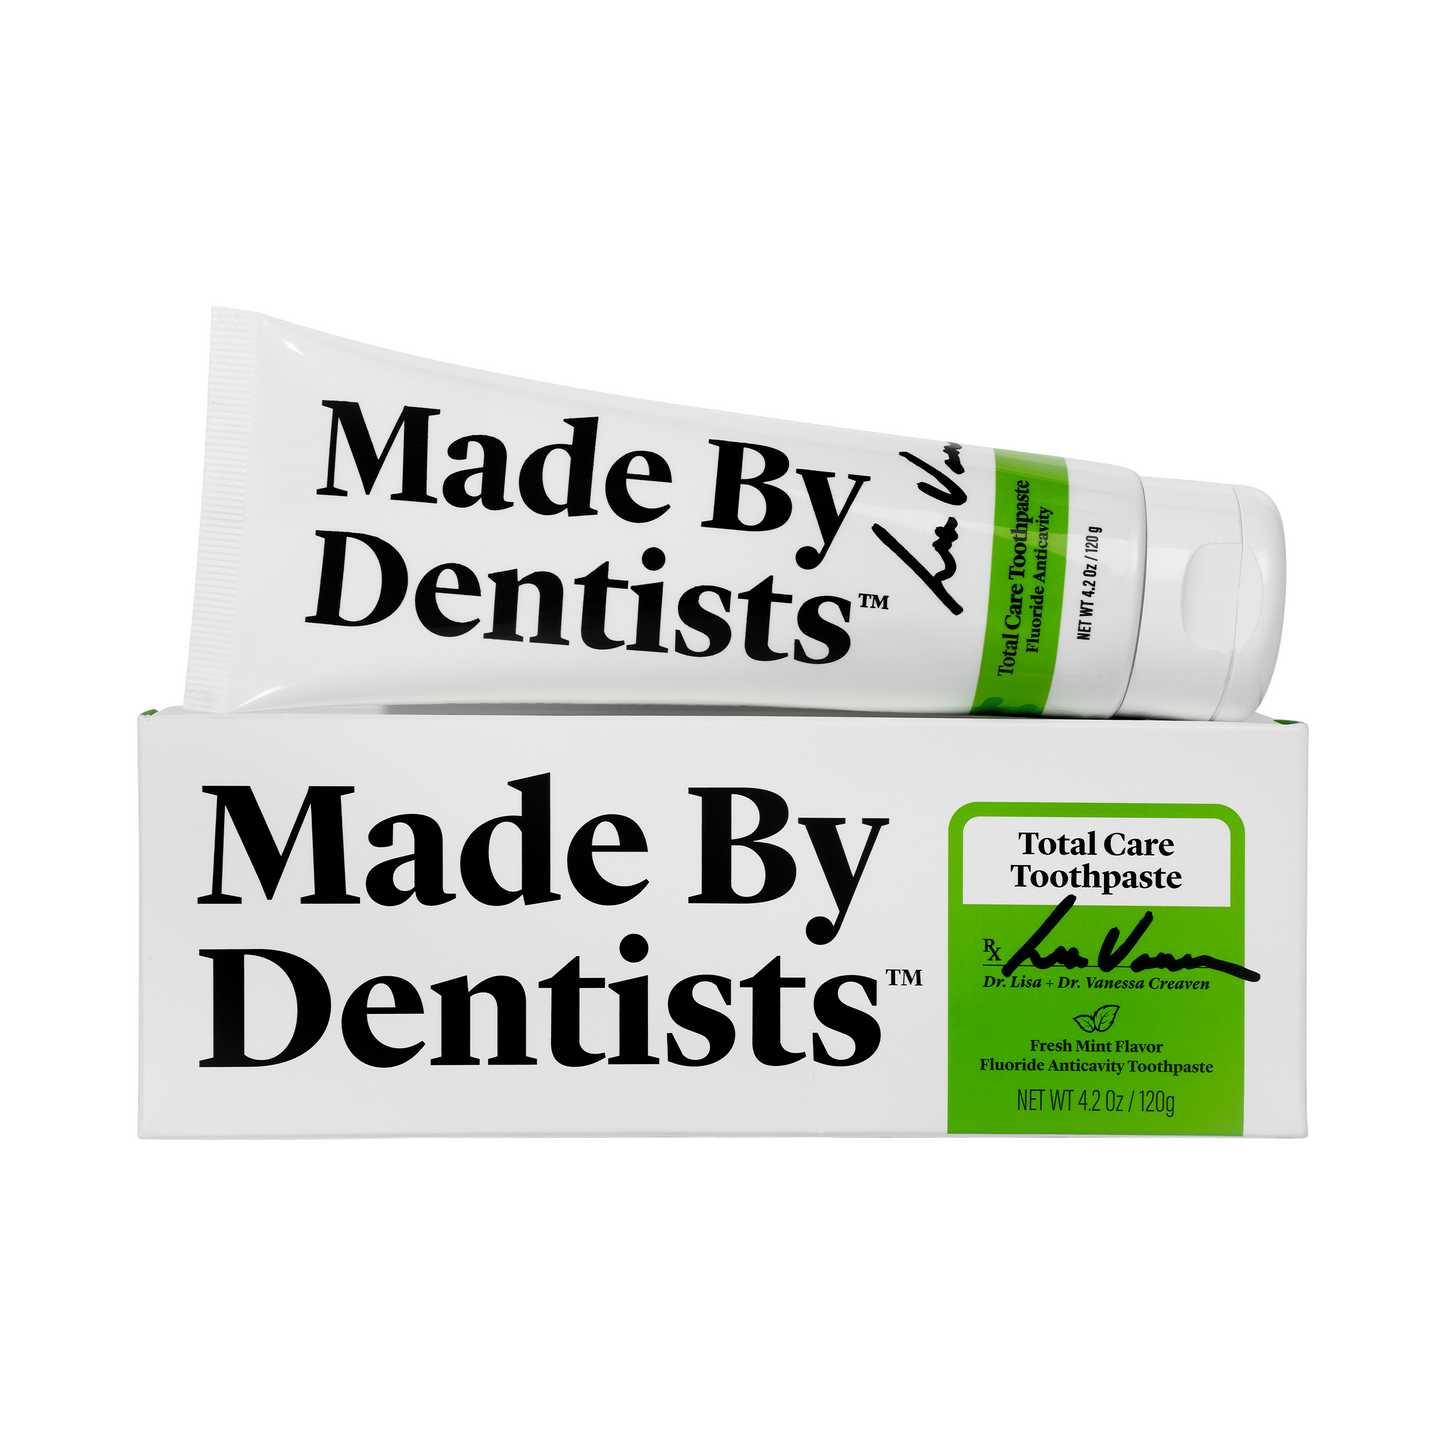 Total Care Toothpaste X4 Bundle